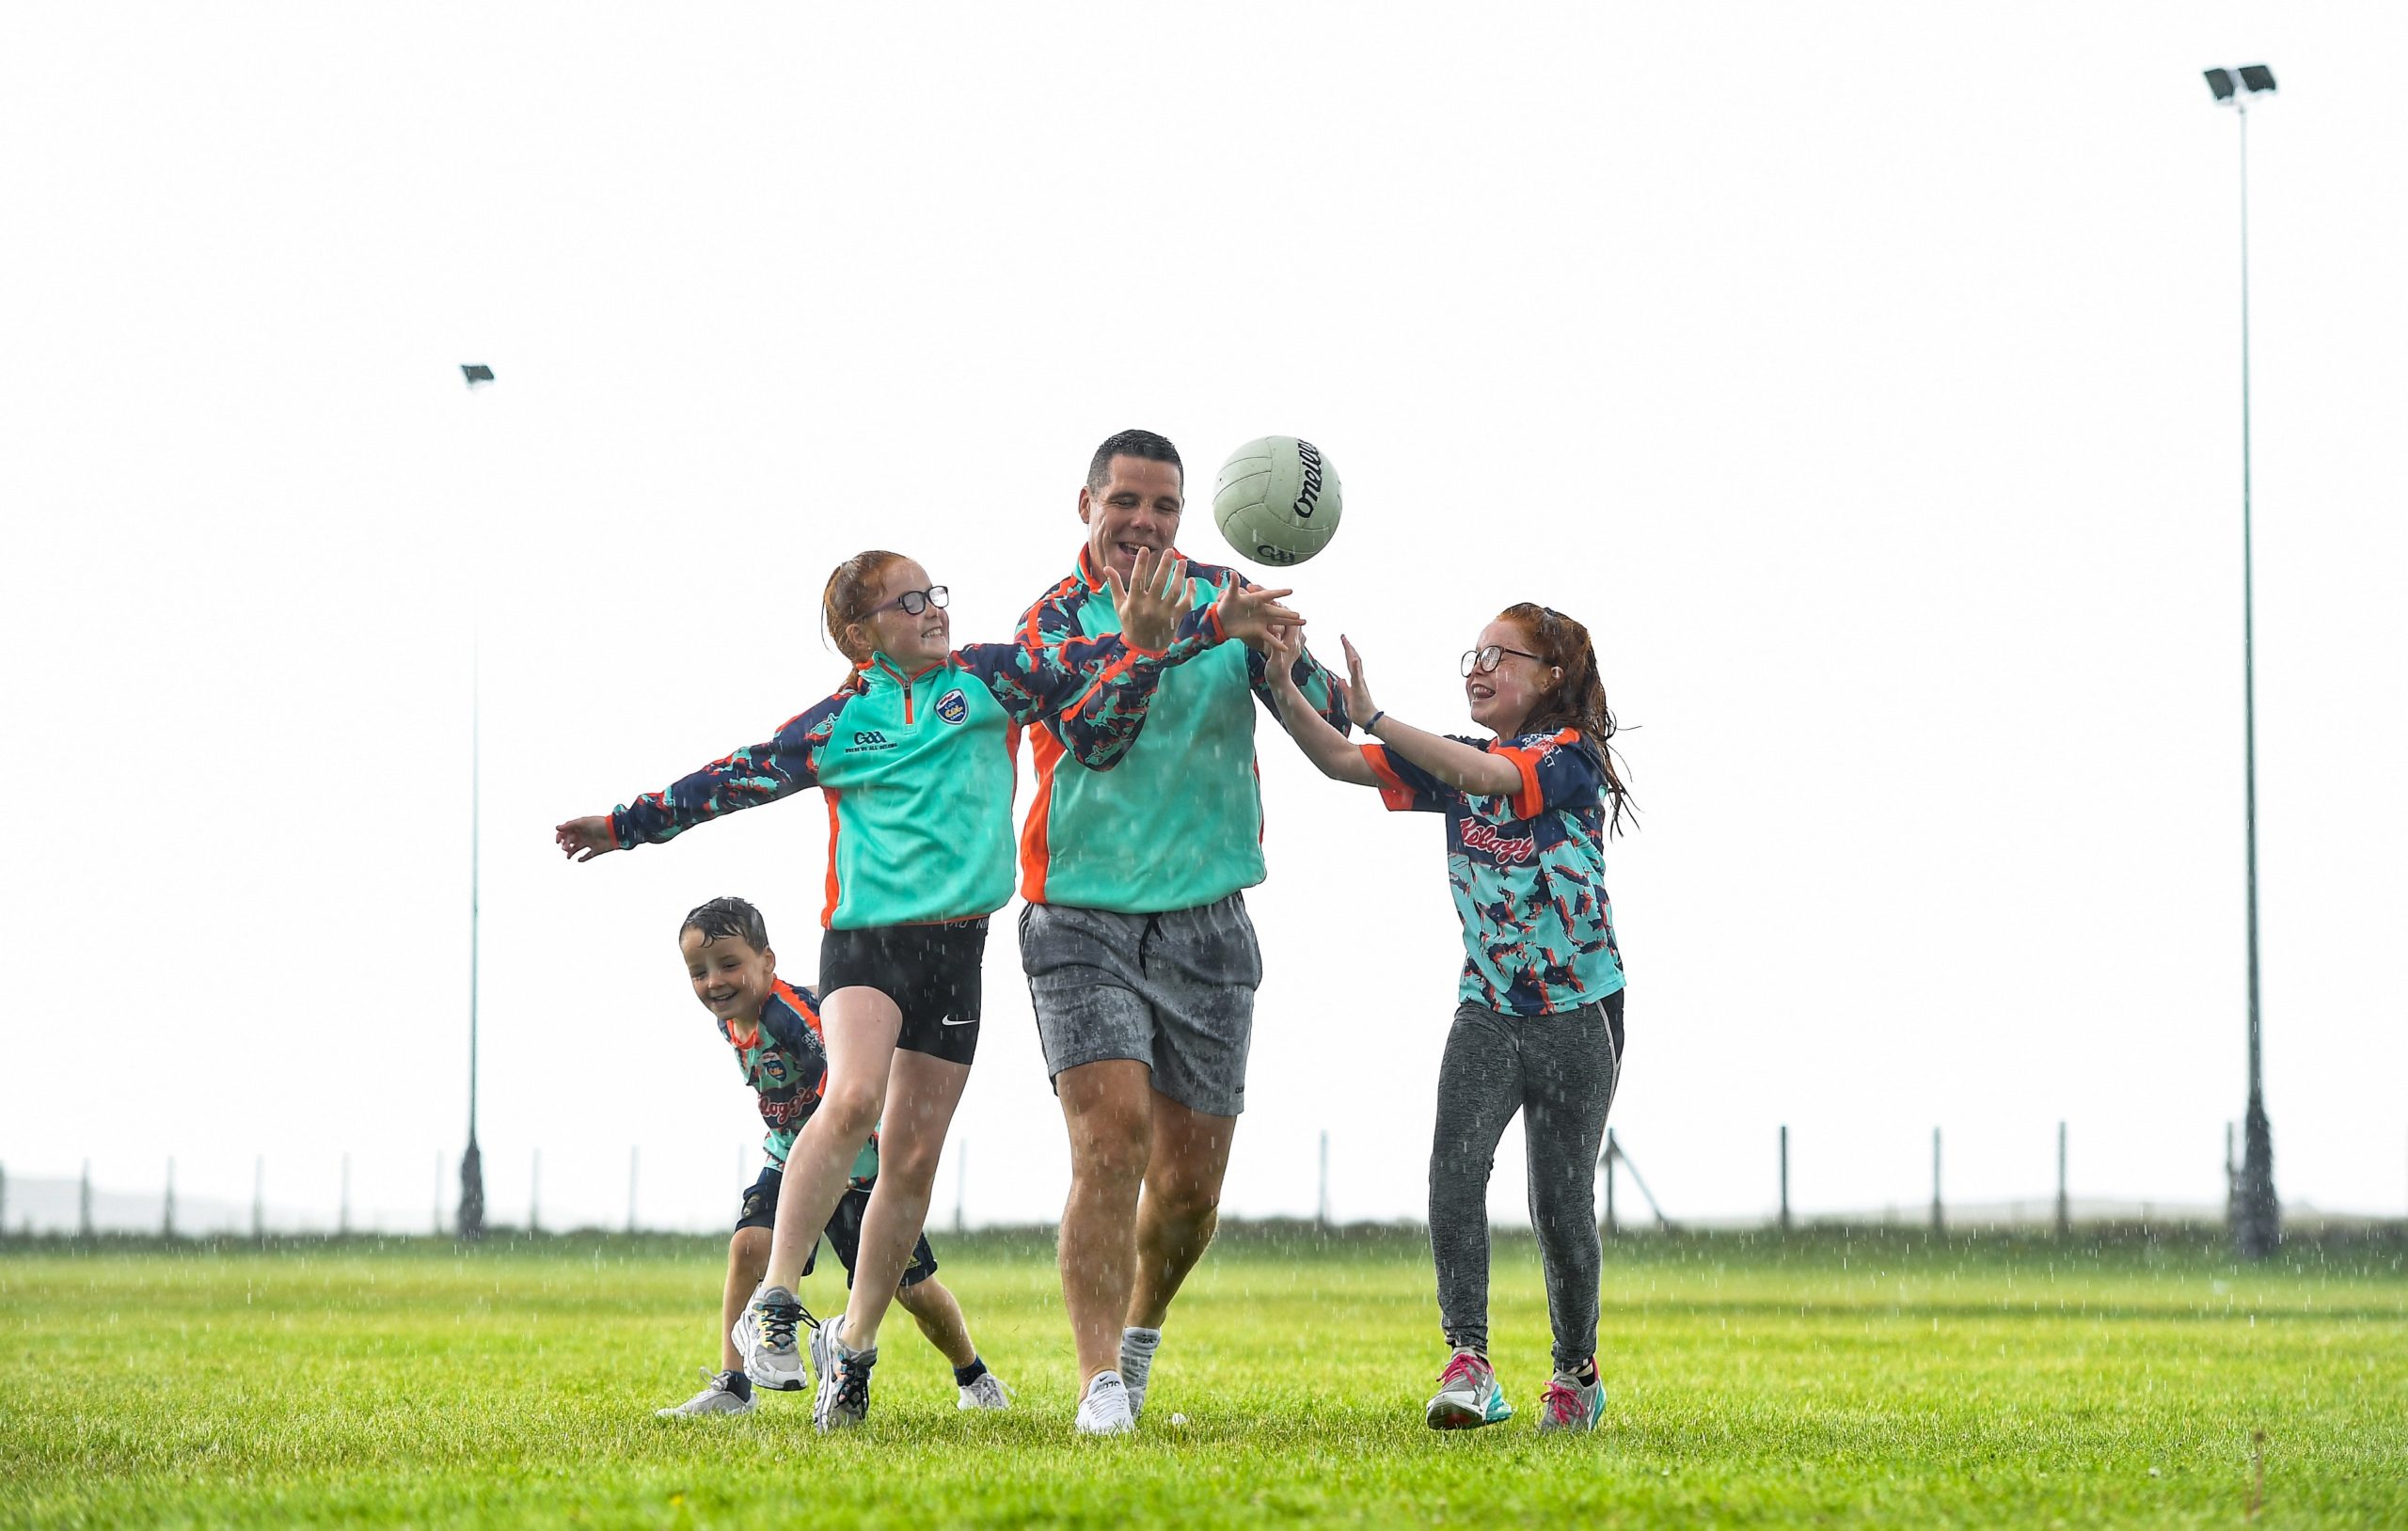 Calling all Wexford GAA Clubs Kellogg’s launches nationwide competition with prizes worth €40,000 up for grabs for your local GAA club